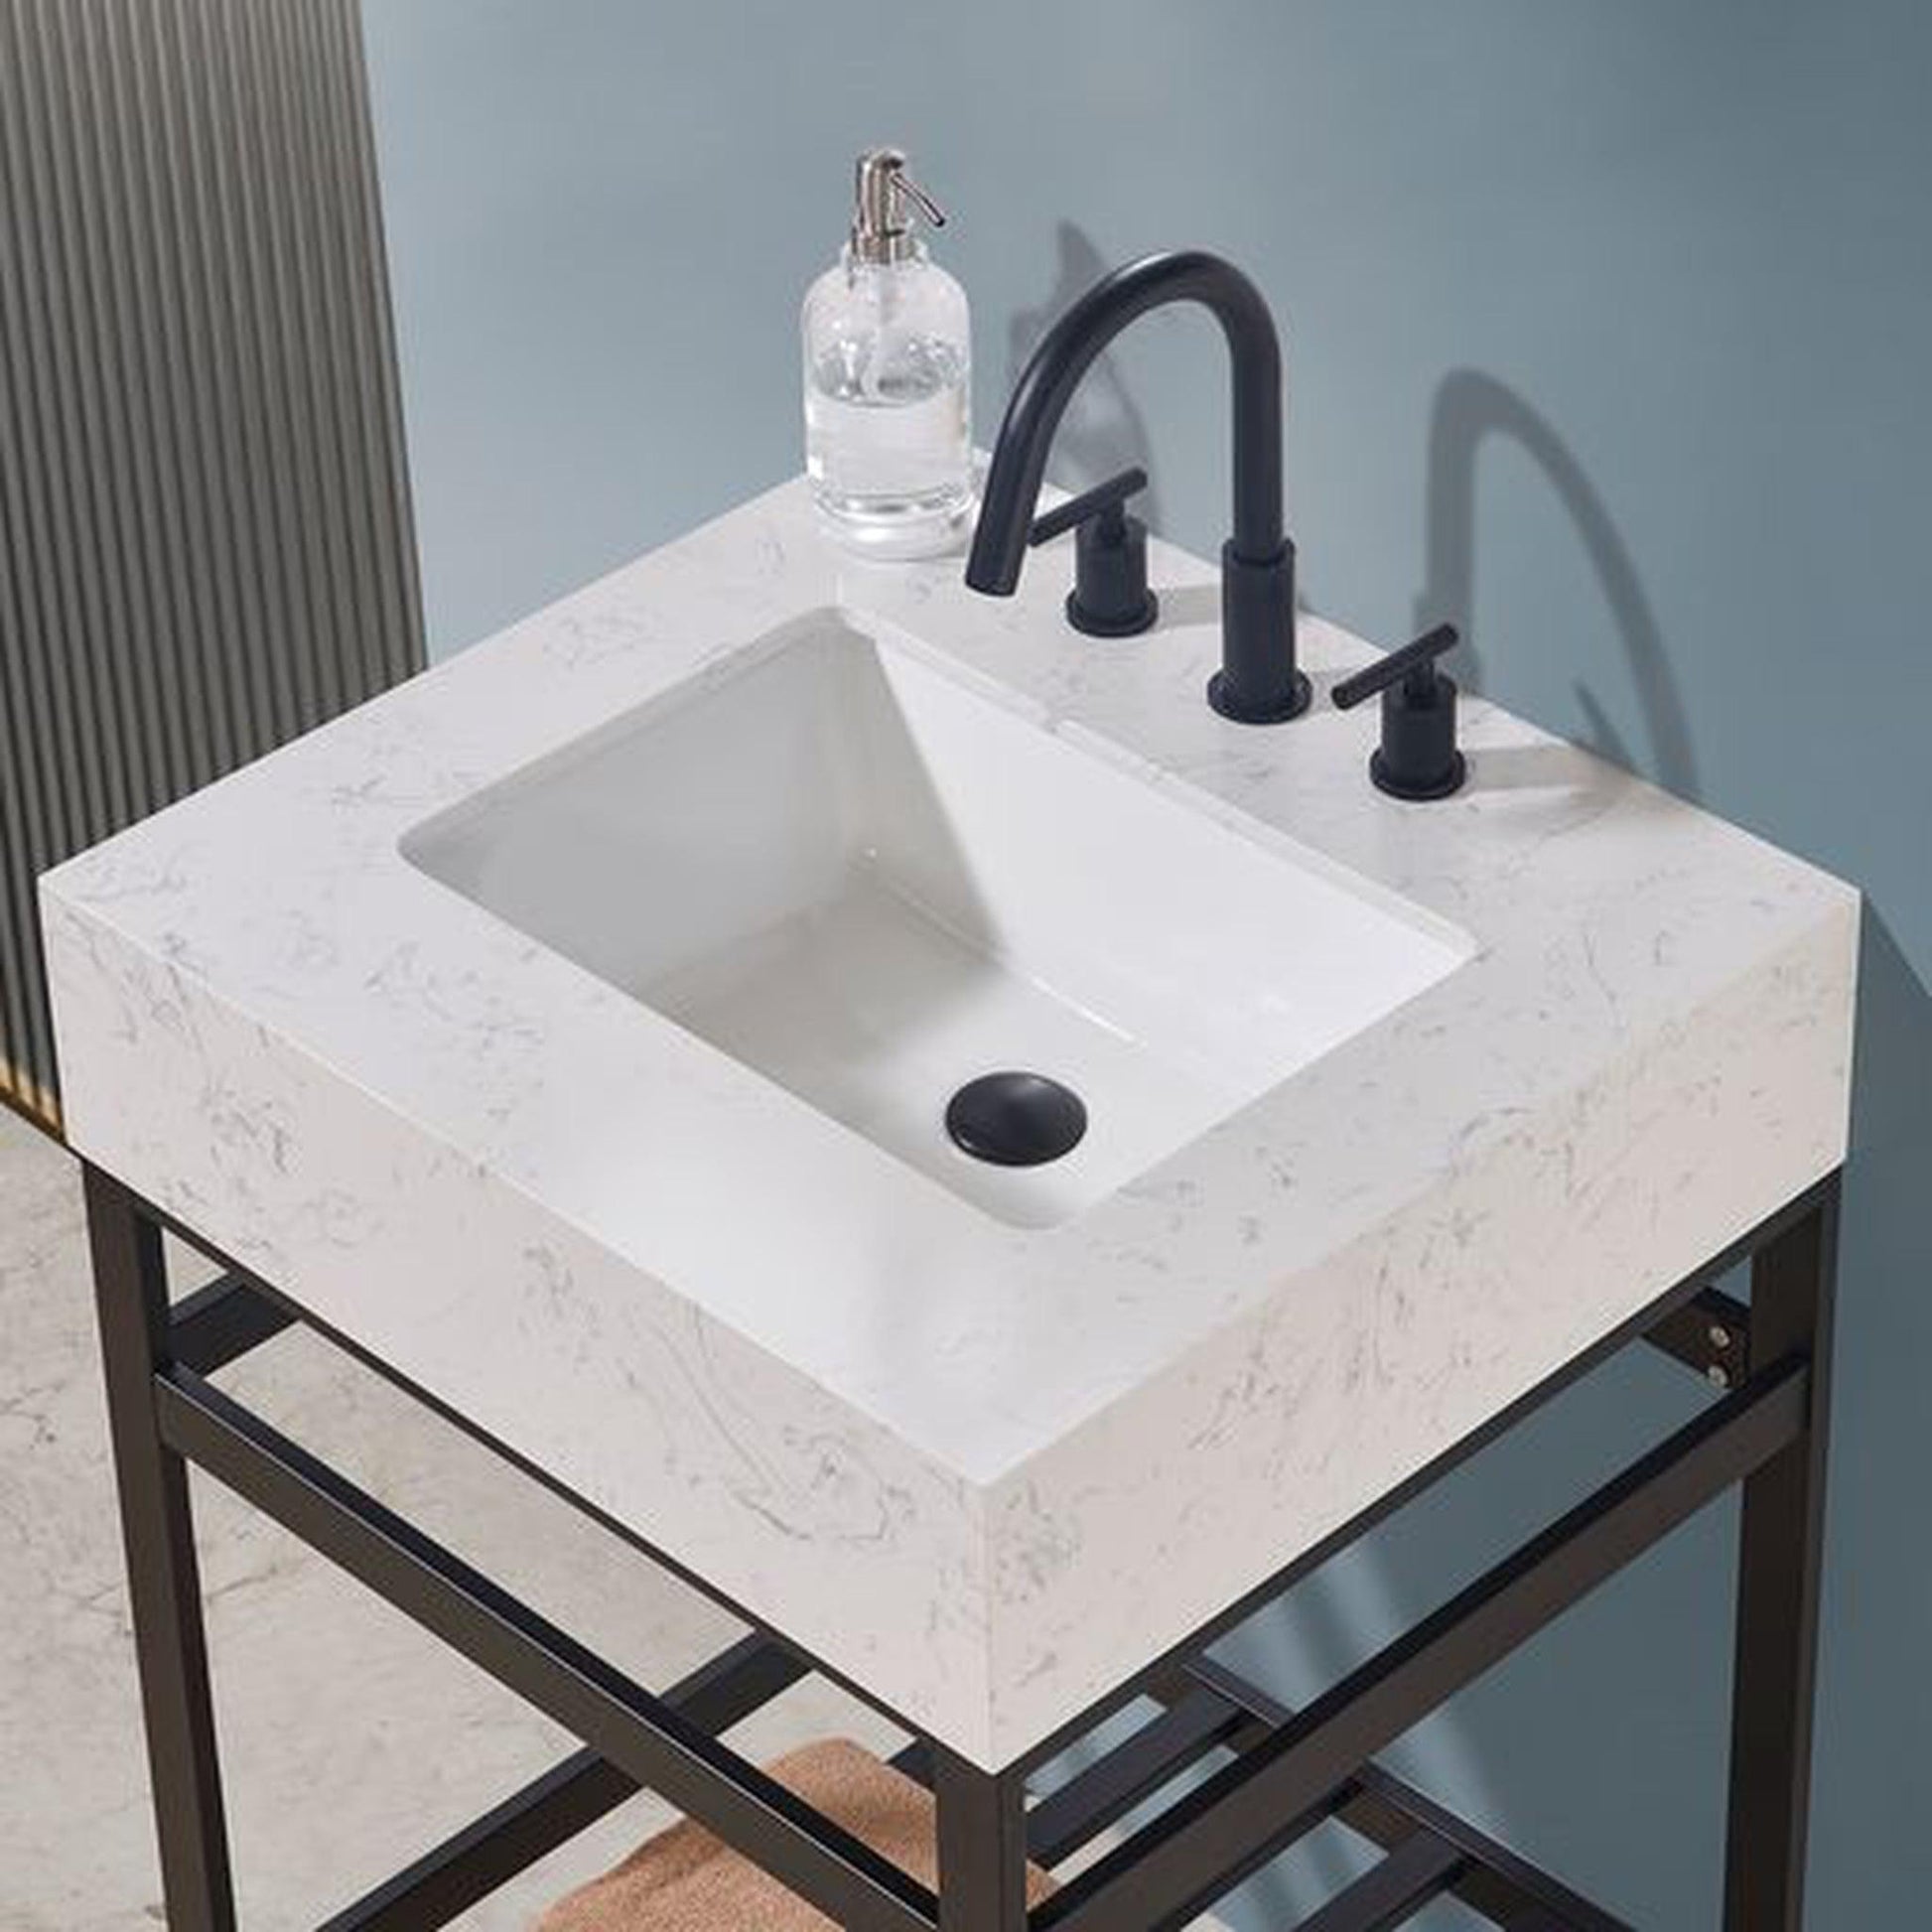 Altair Merano 24" Matte Black Single Stainless Steel Bathroom Vanity Set Console With Aosta White Stone Top, Single Rectangular Undermount Ceramic Sink, and Safety Overflow Hole